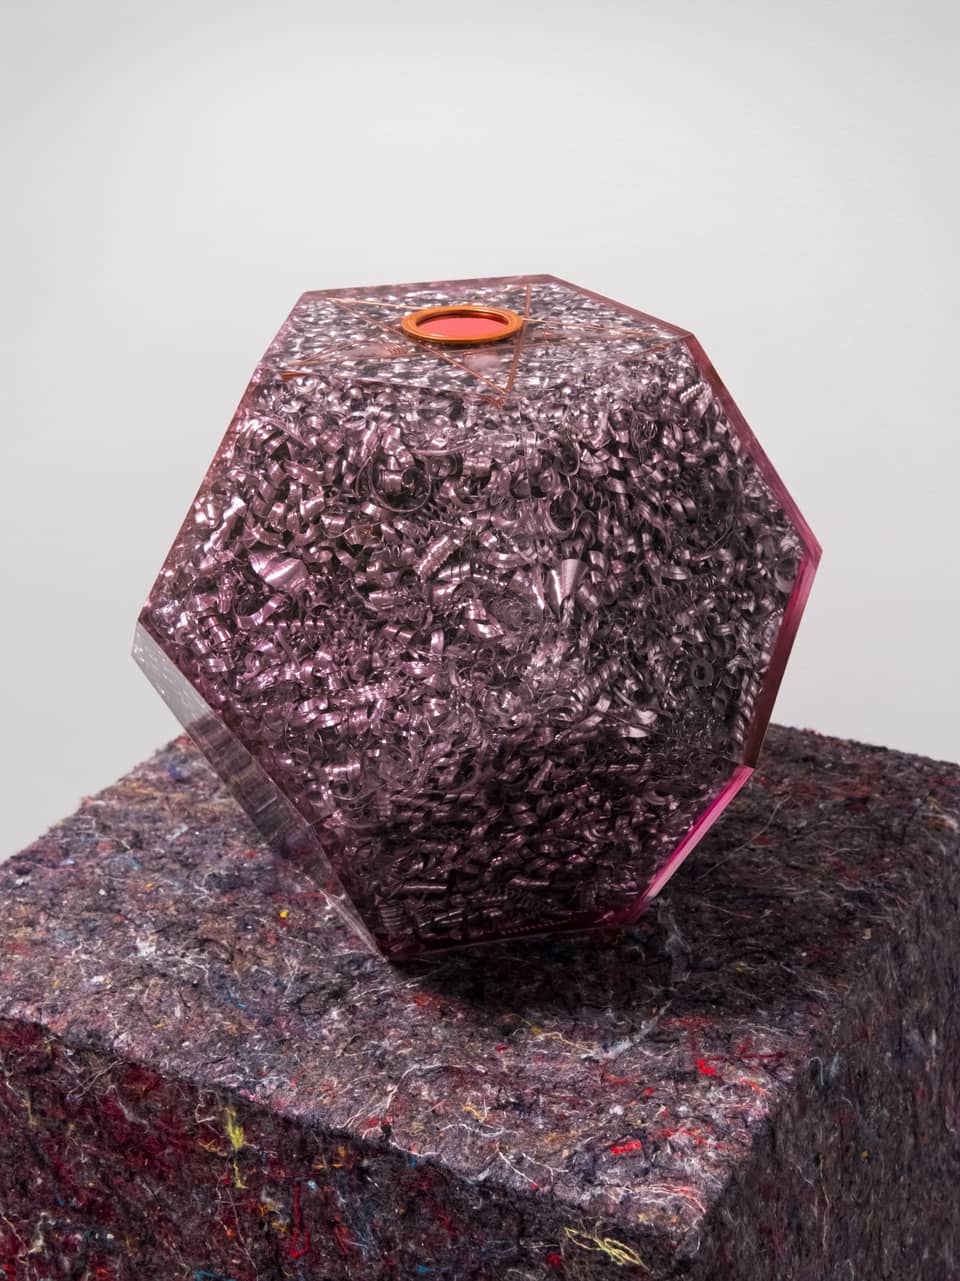 A tinted resin dodecahedron